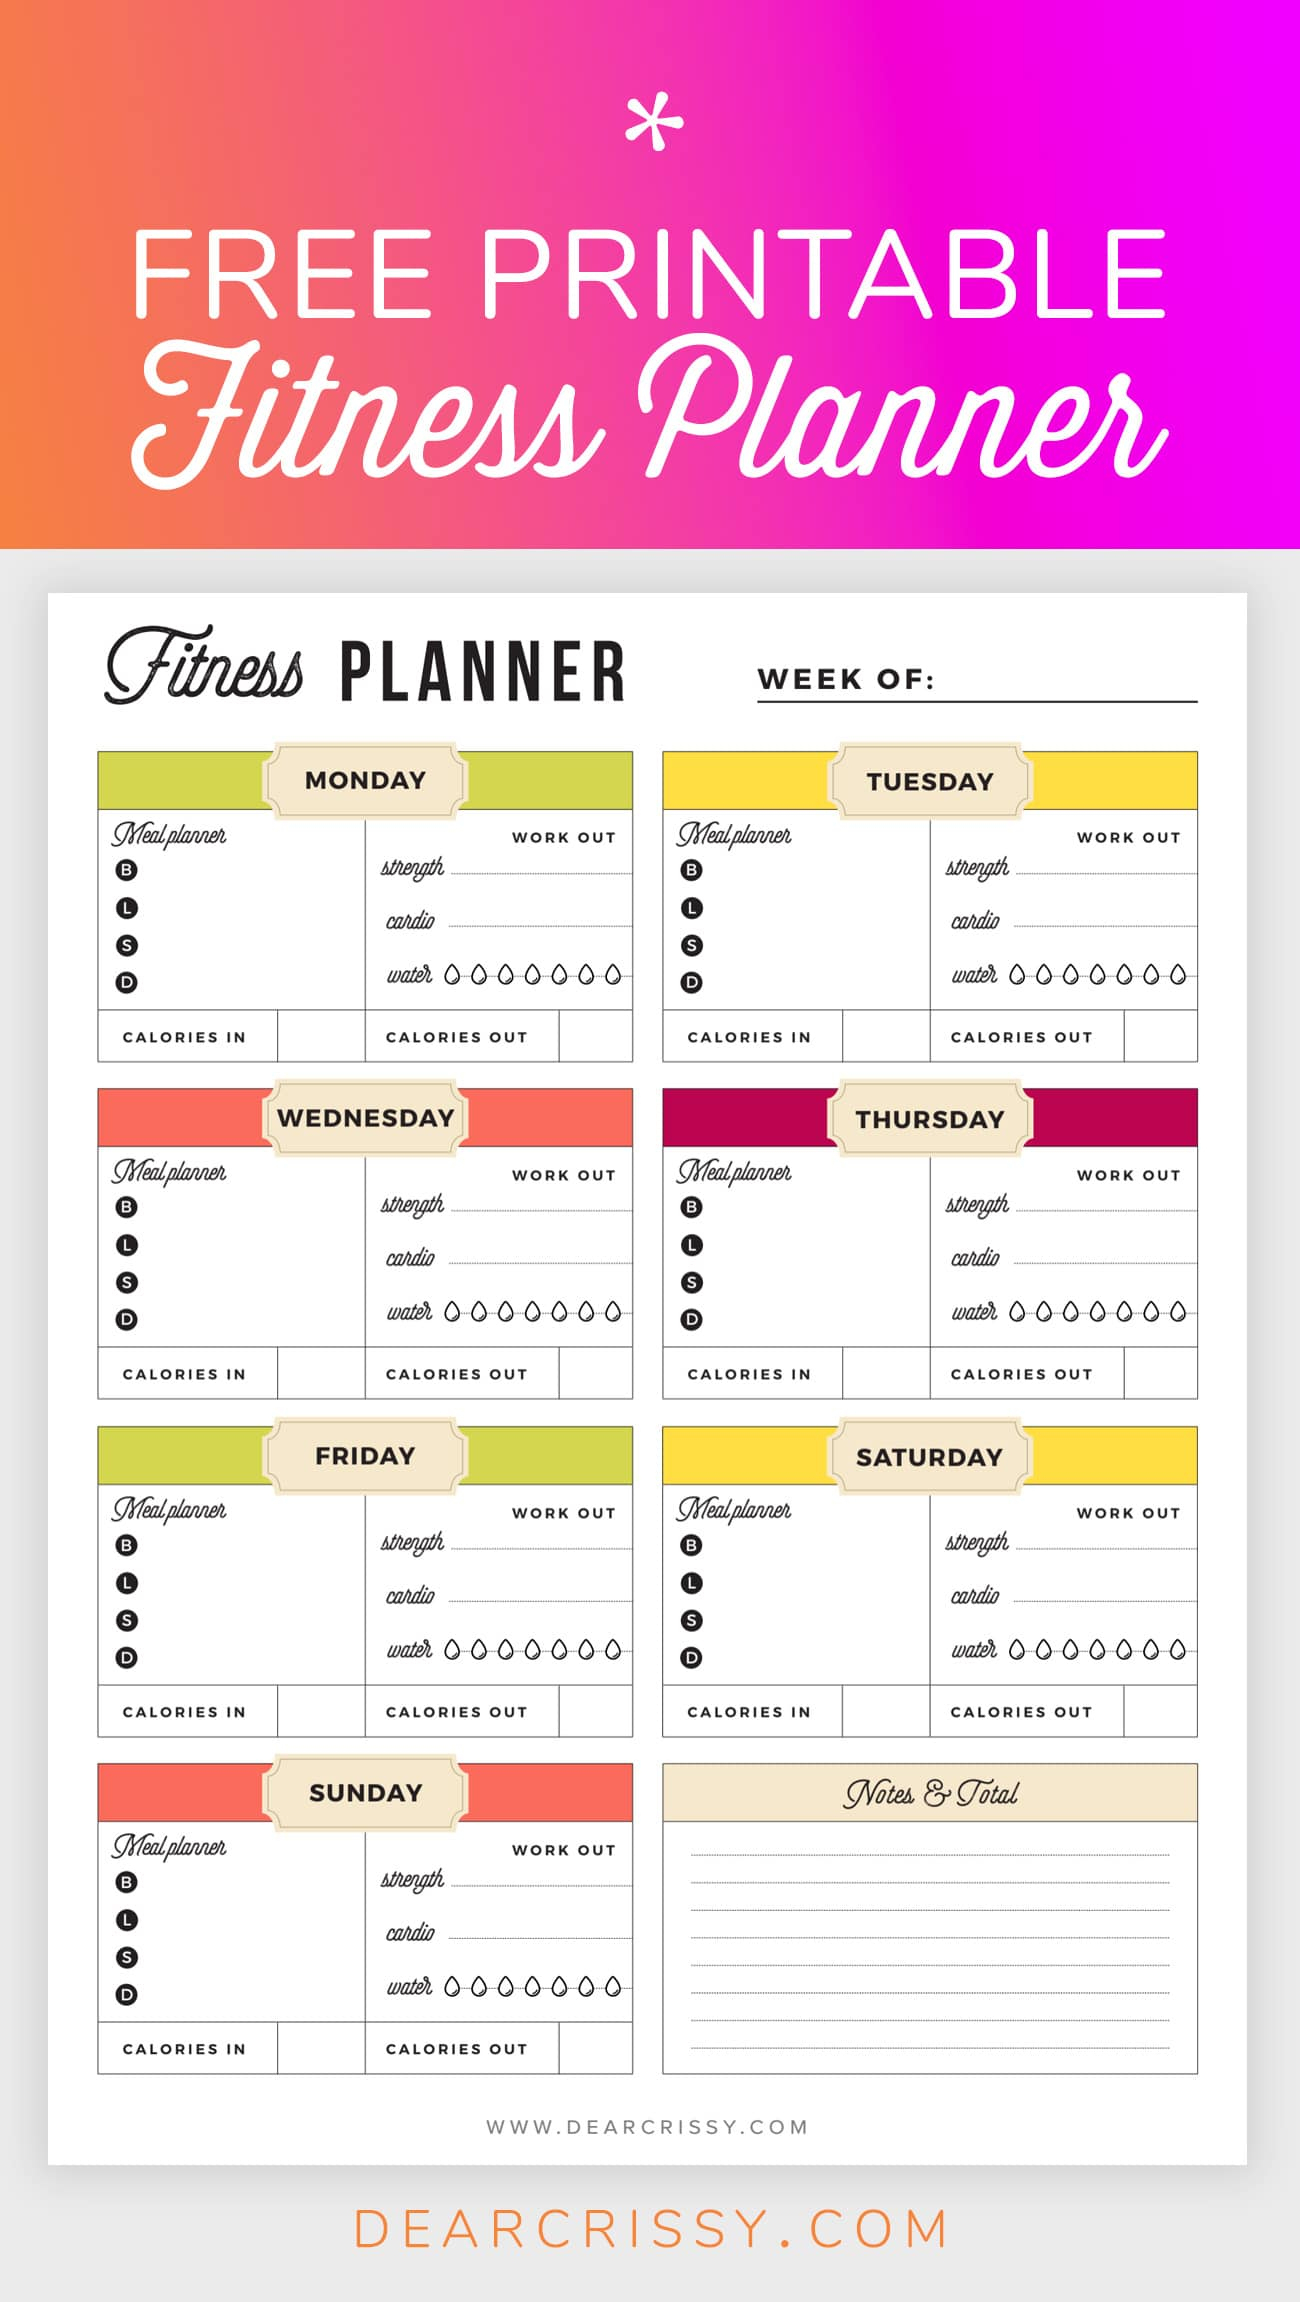 Free Printable Fitness Planner - Meal And Fitness Tracker, Start Today! - Free Printable Fitness Log